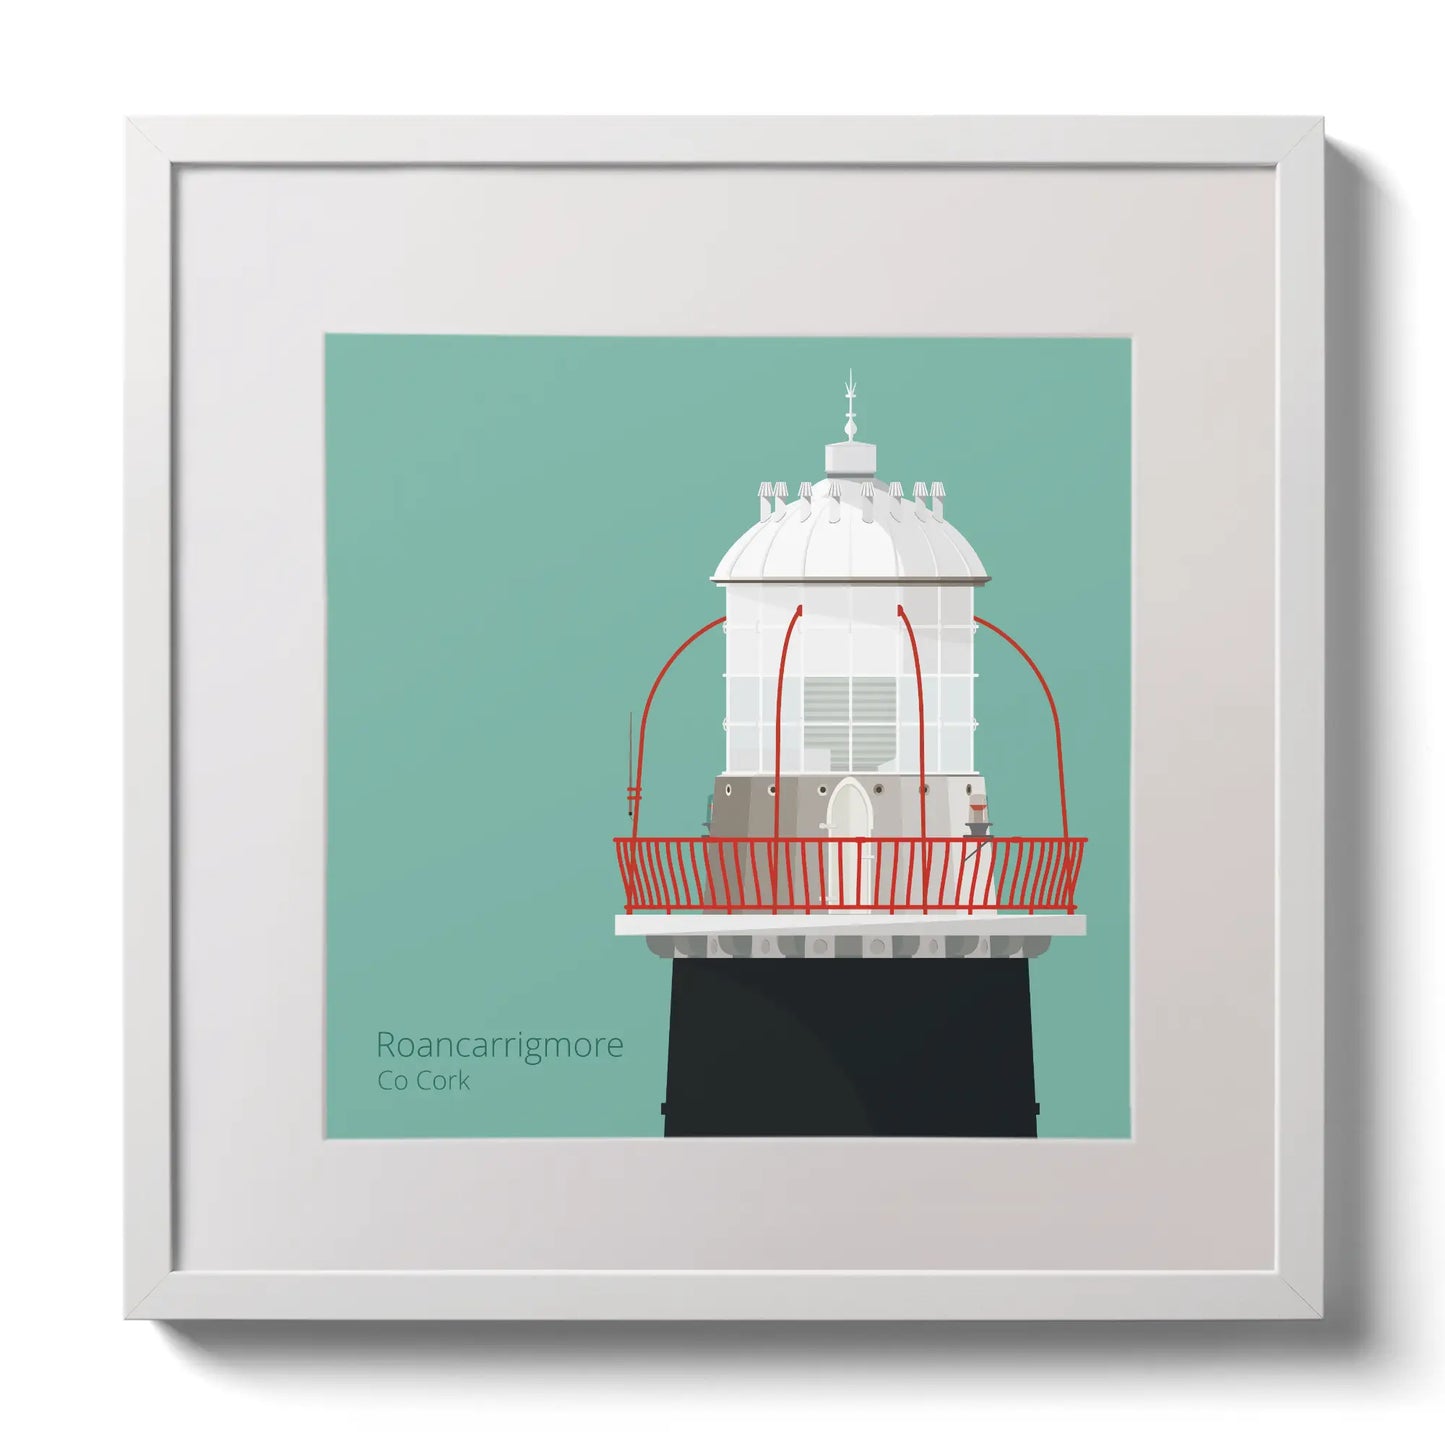 Illustration of Roancarrigmore lighthouse on an ocean green background,  in a white square frame measuring 30x30cm.